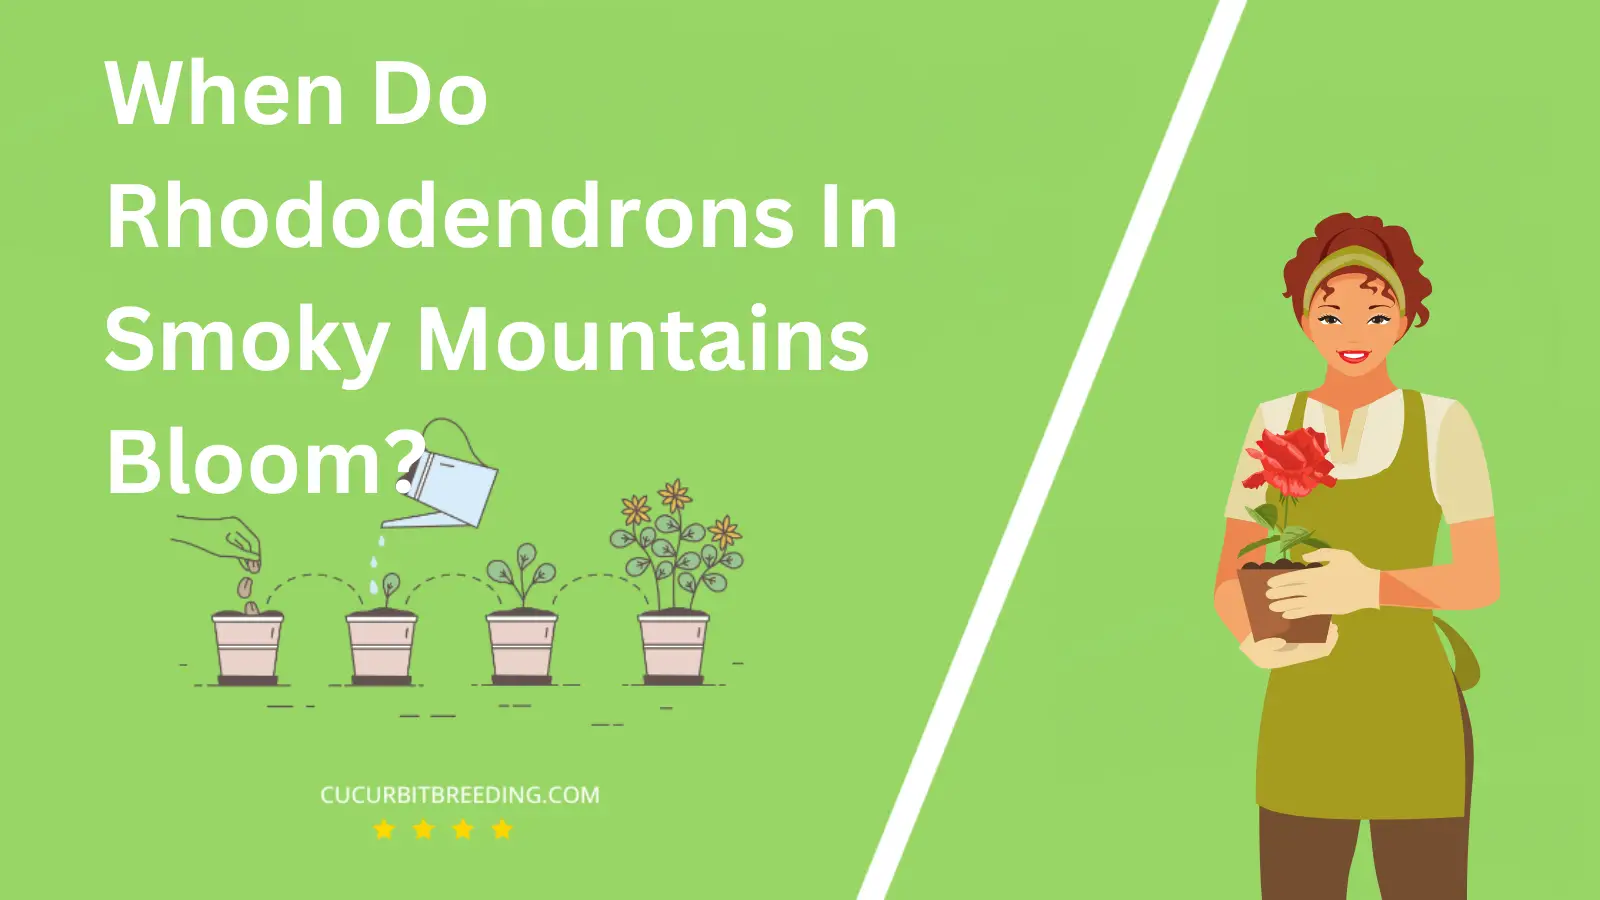 When Do Rhododendrons In Smoky Mountains Bloom?